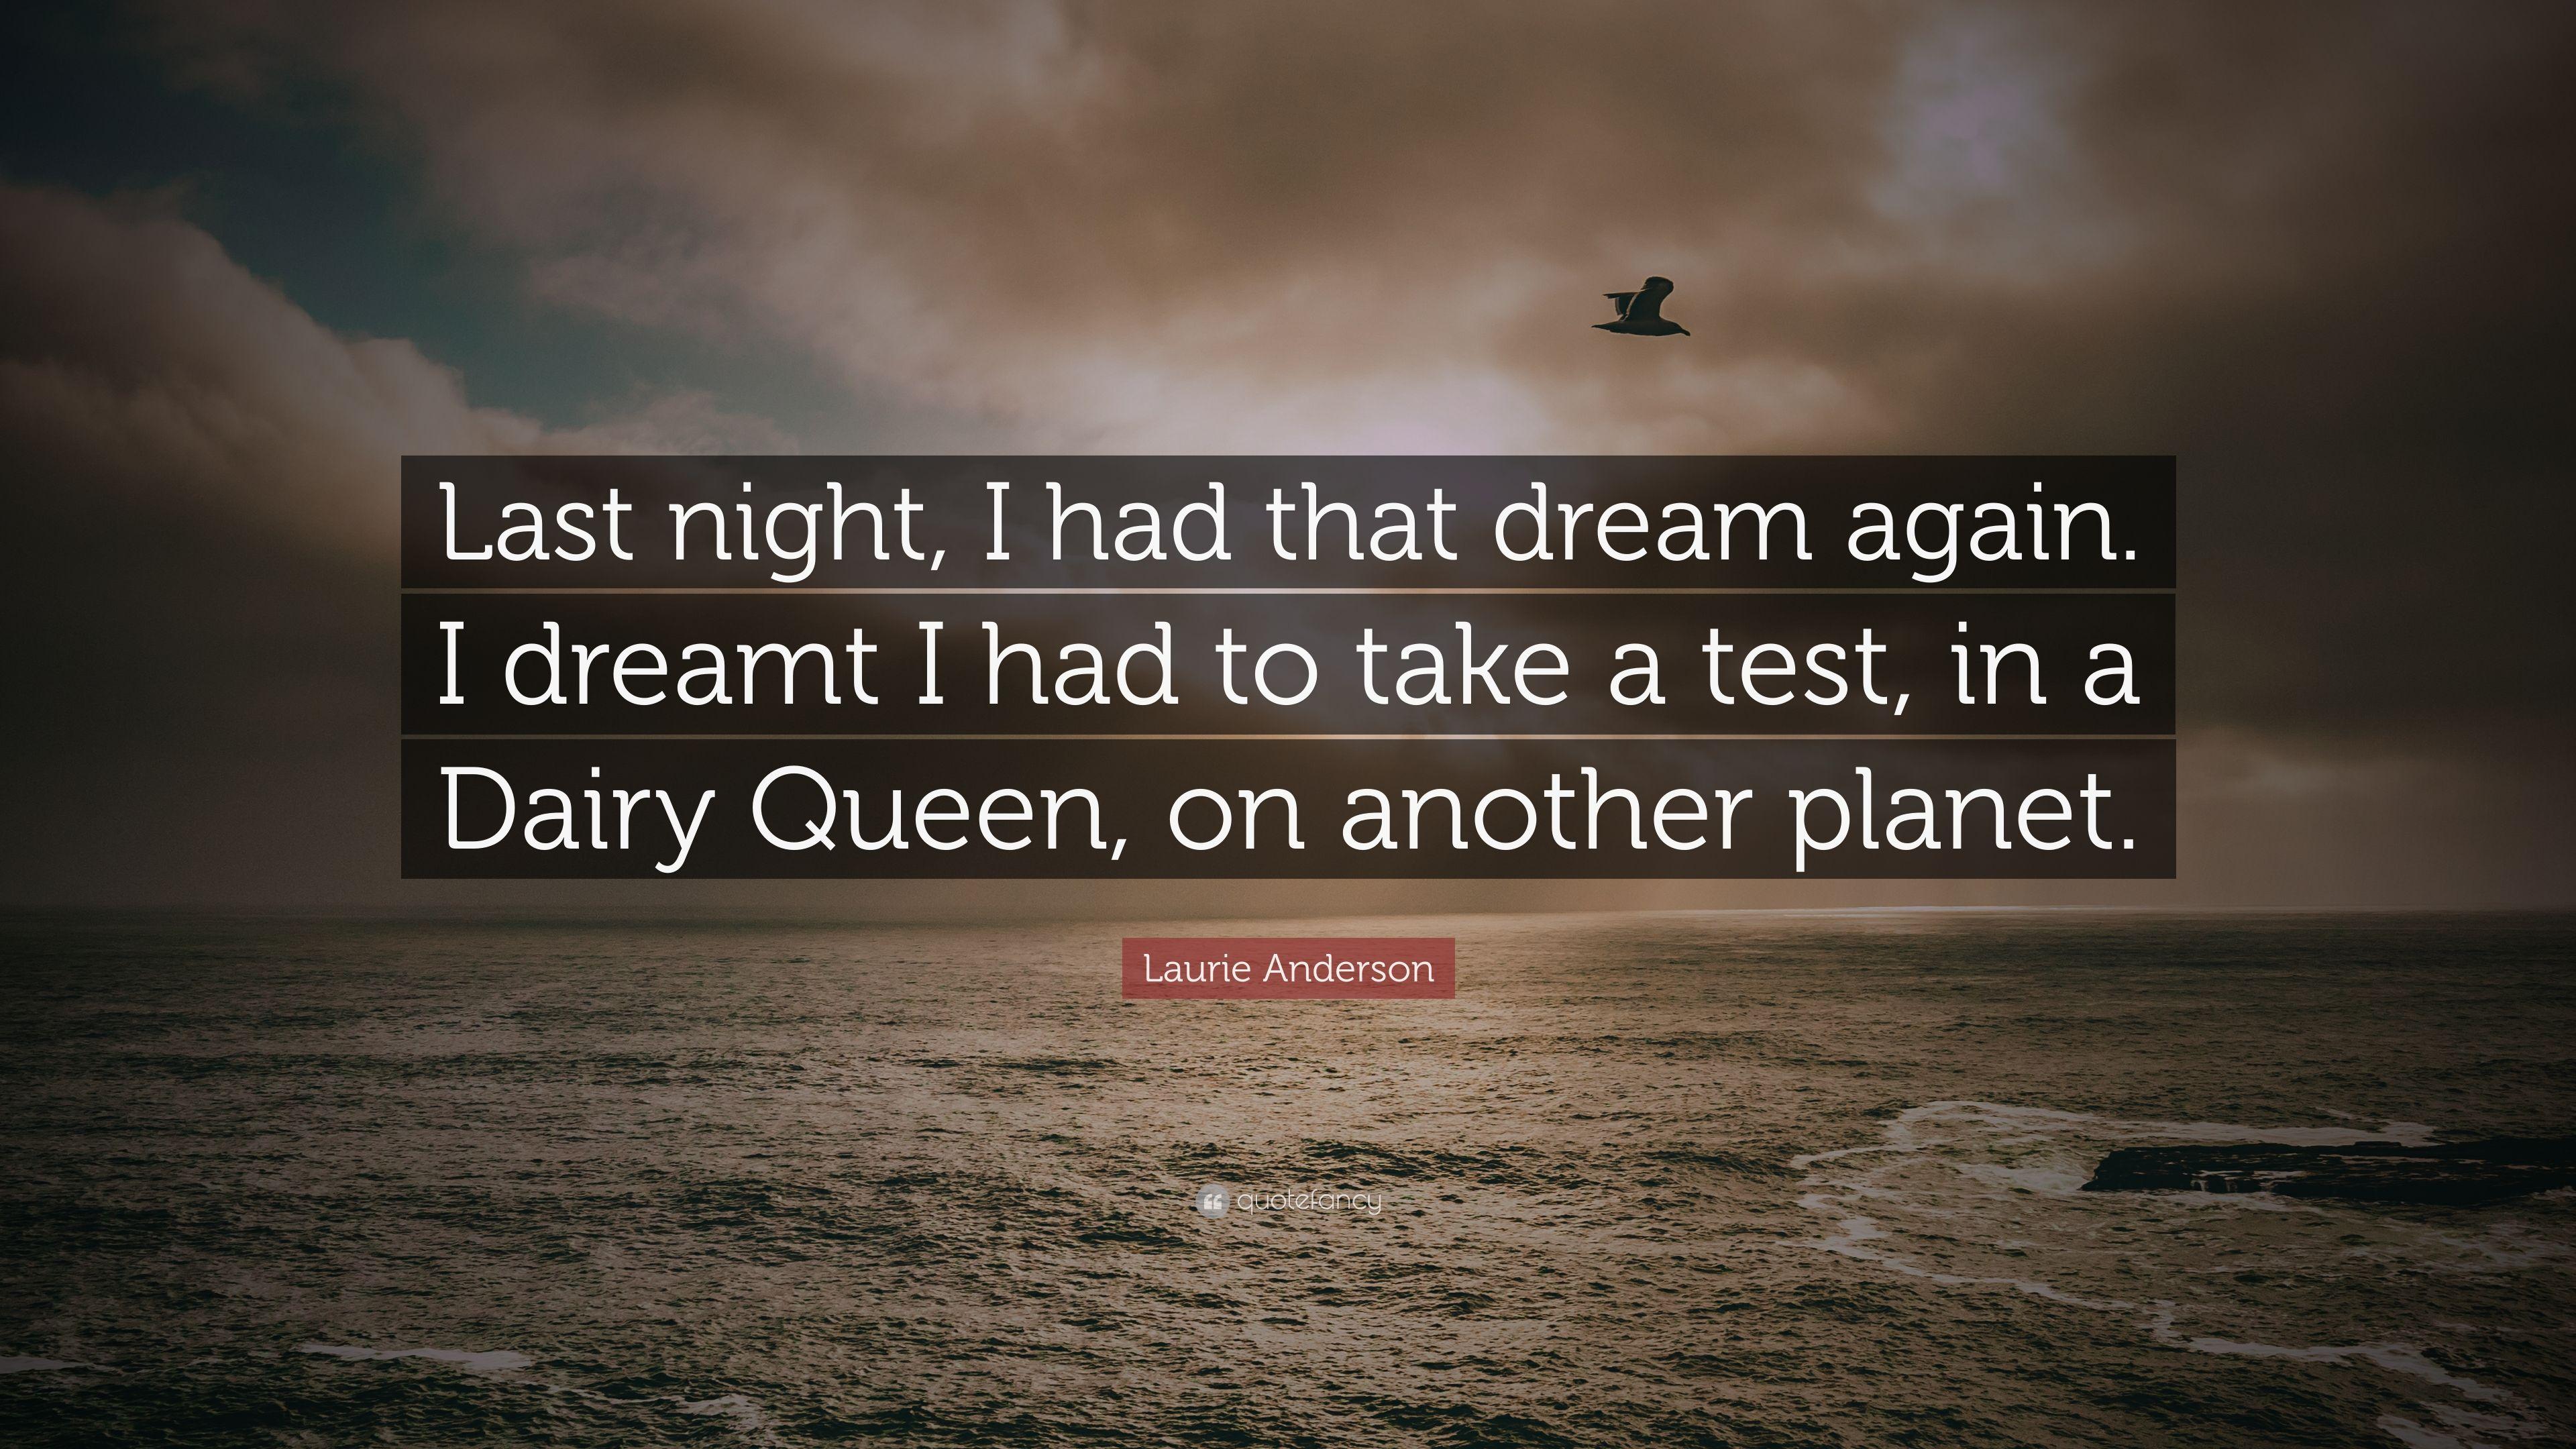 Laurie Anderson Quote: "Last night, I had that dream again. 